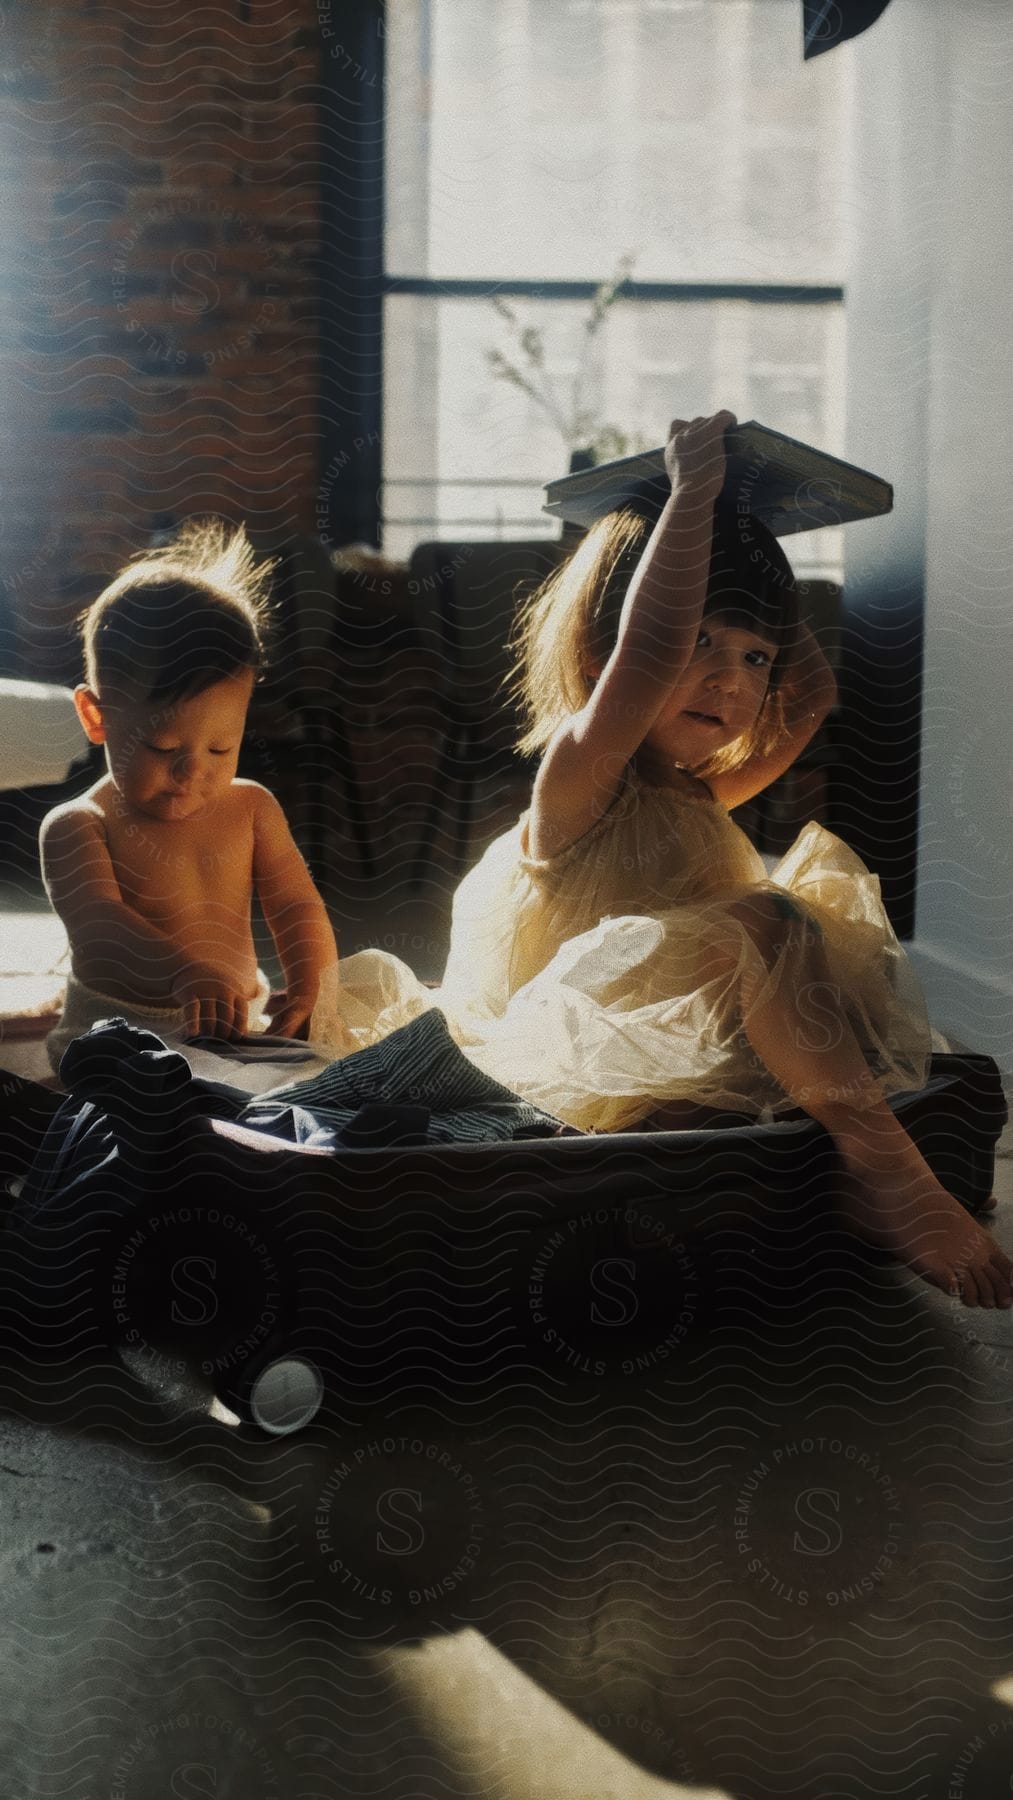 Two children are playing with a suitcase, illuminated by natural light from a nearby window.